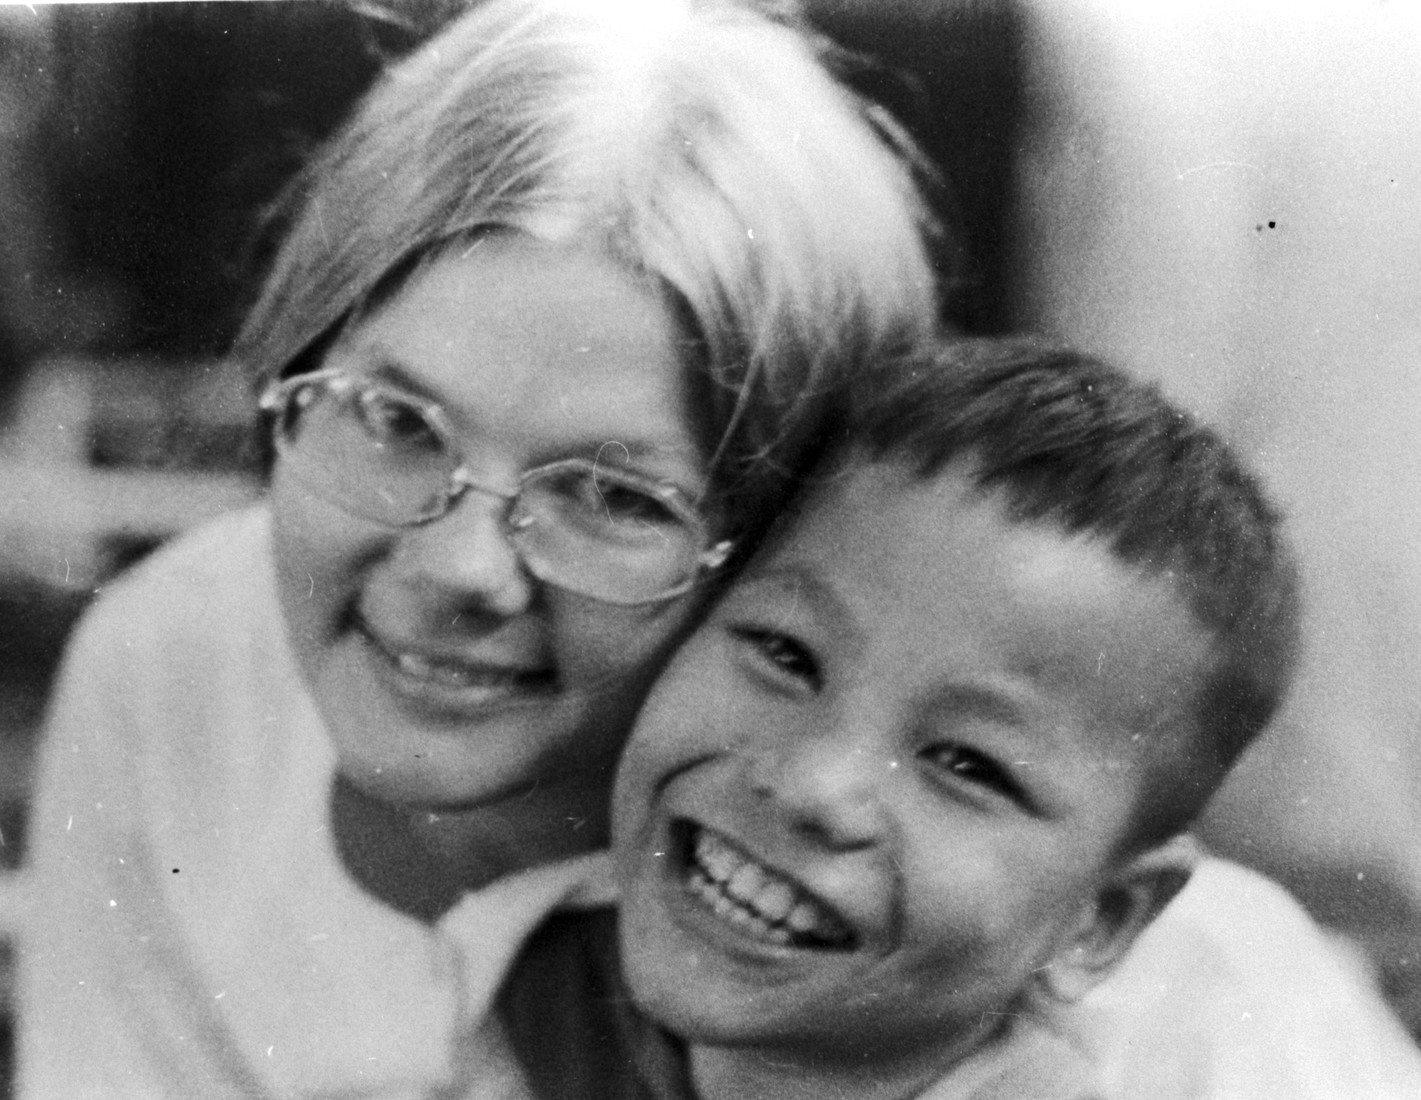 A woman and young boy smiling into the camera